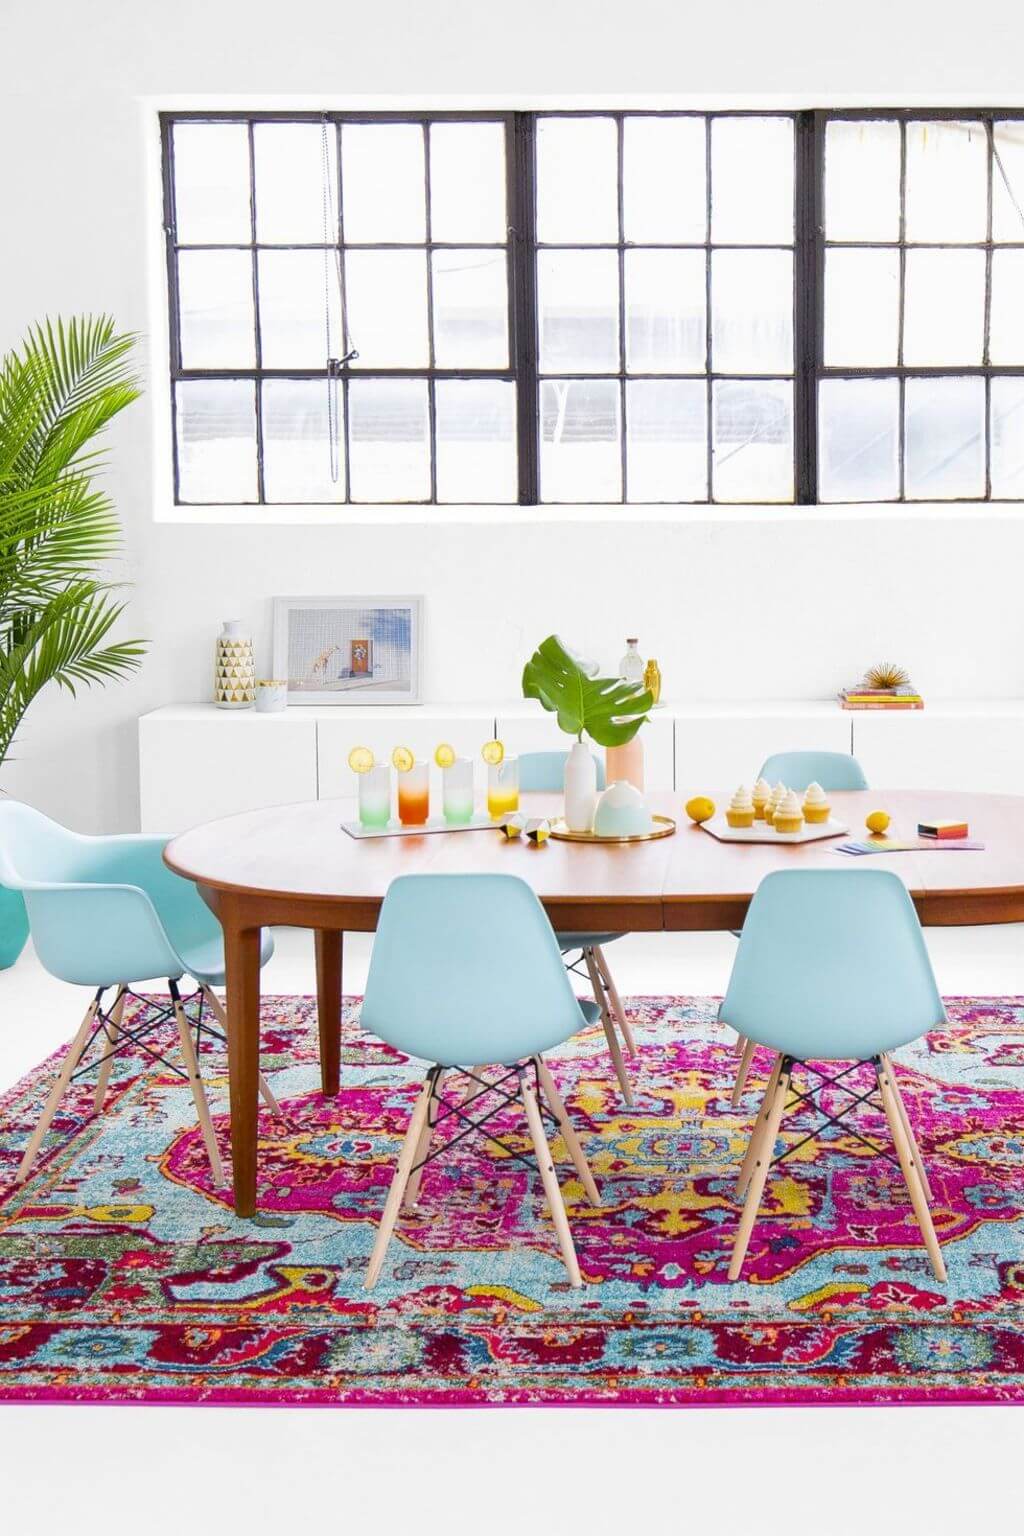 A dining table with blue chairs and a colorful rug
